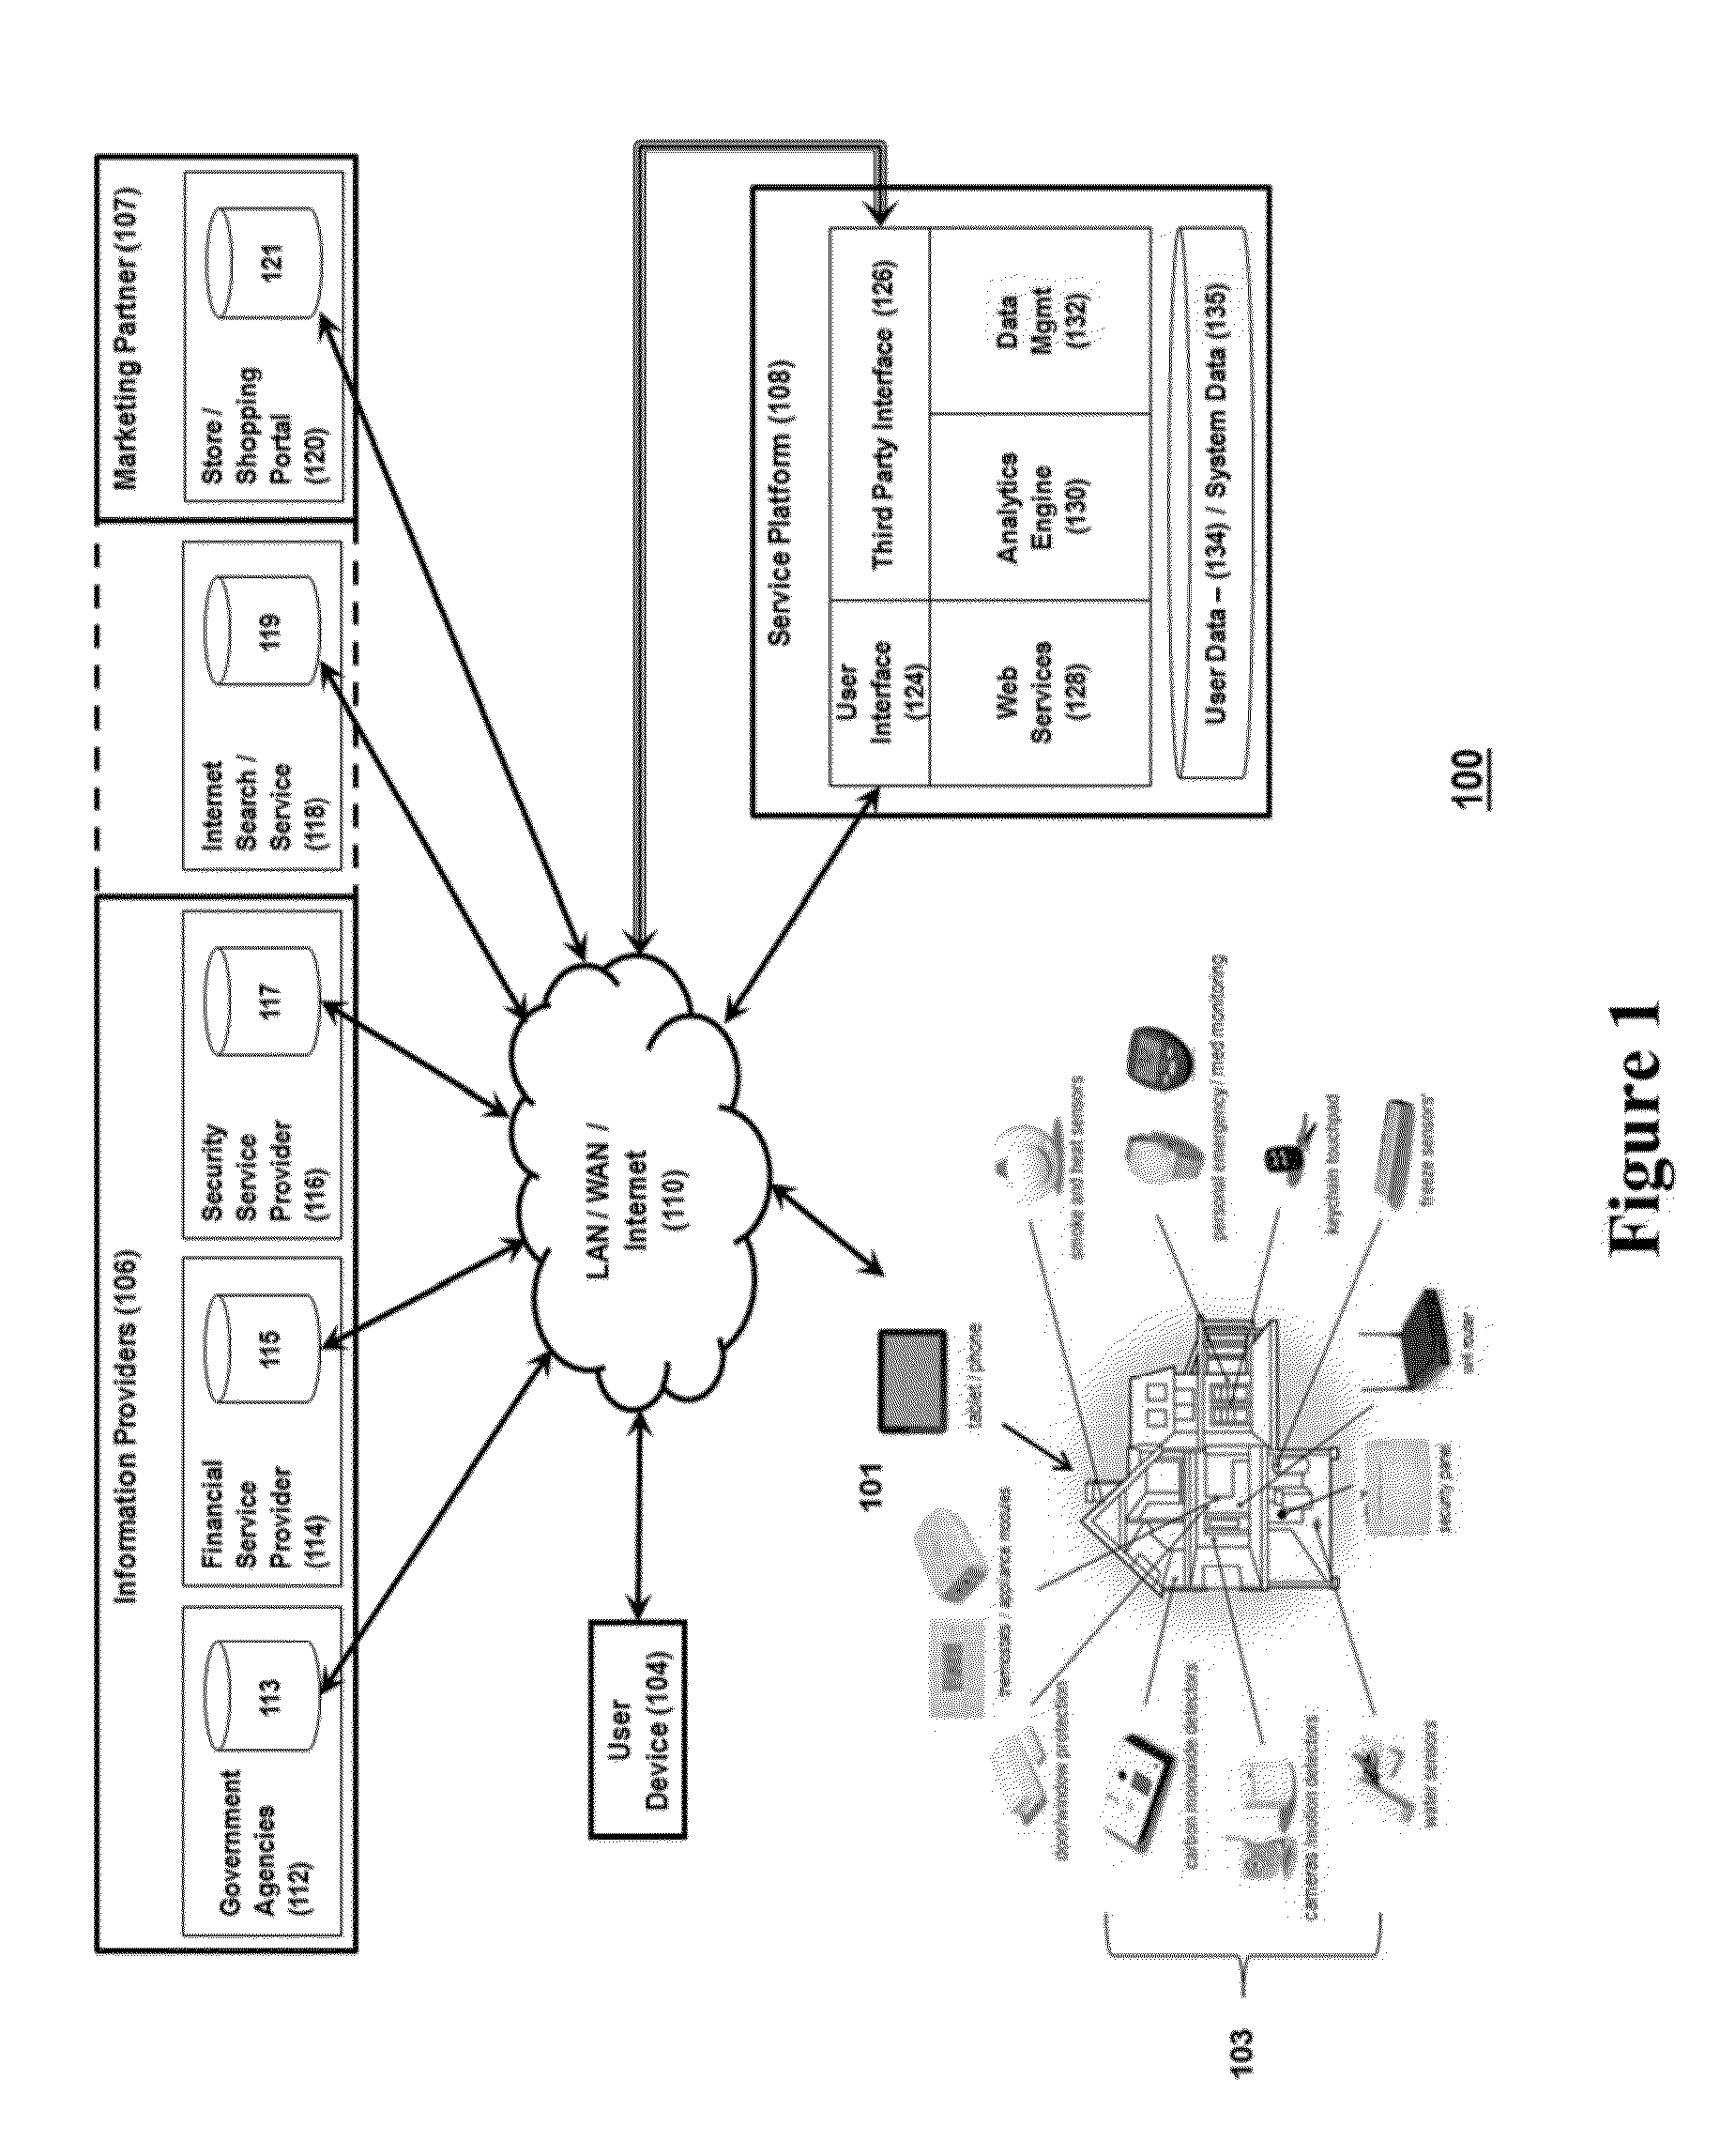 System for controlling use of personal data